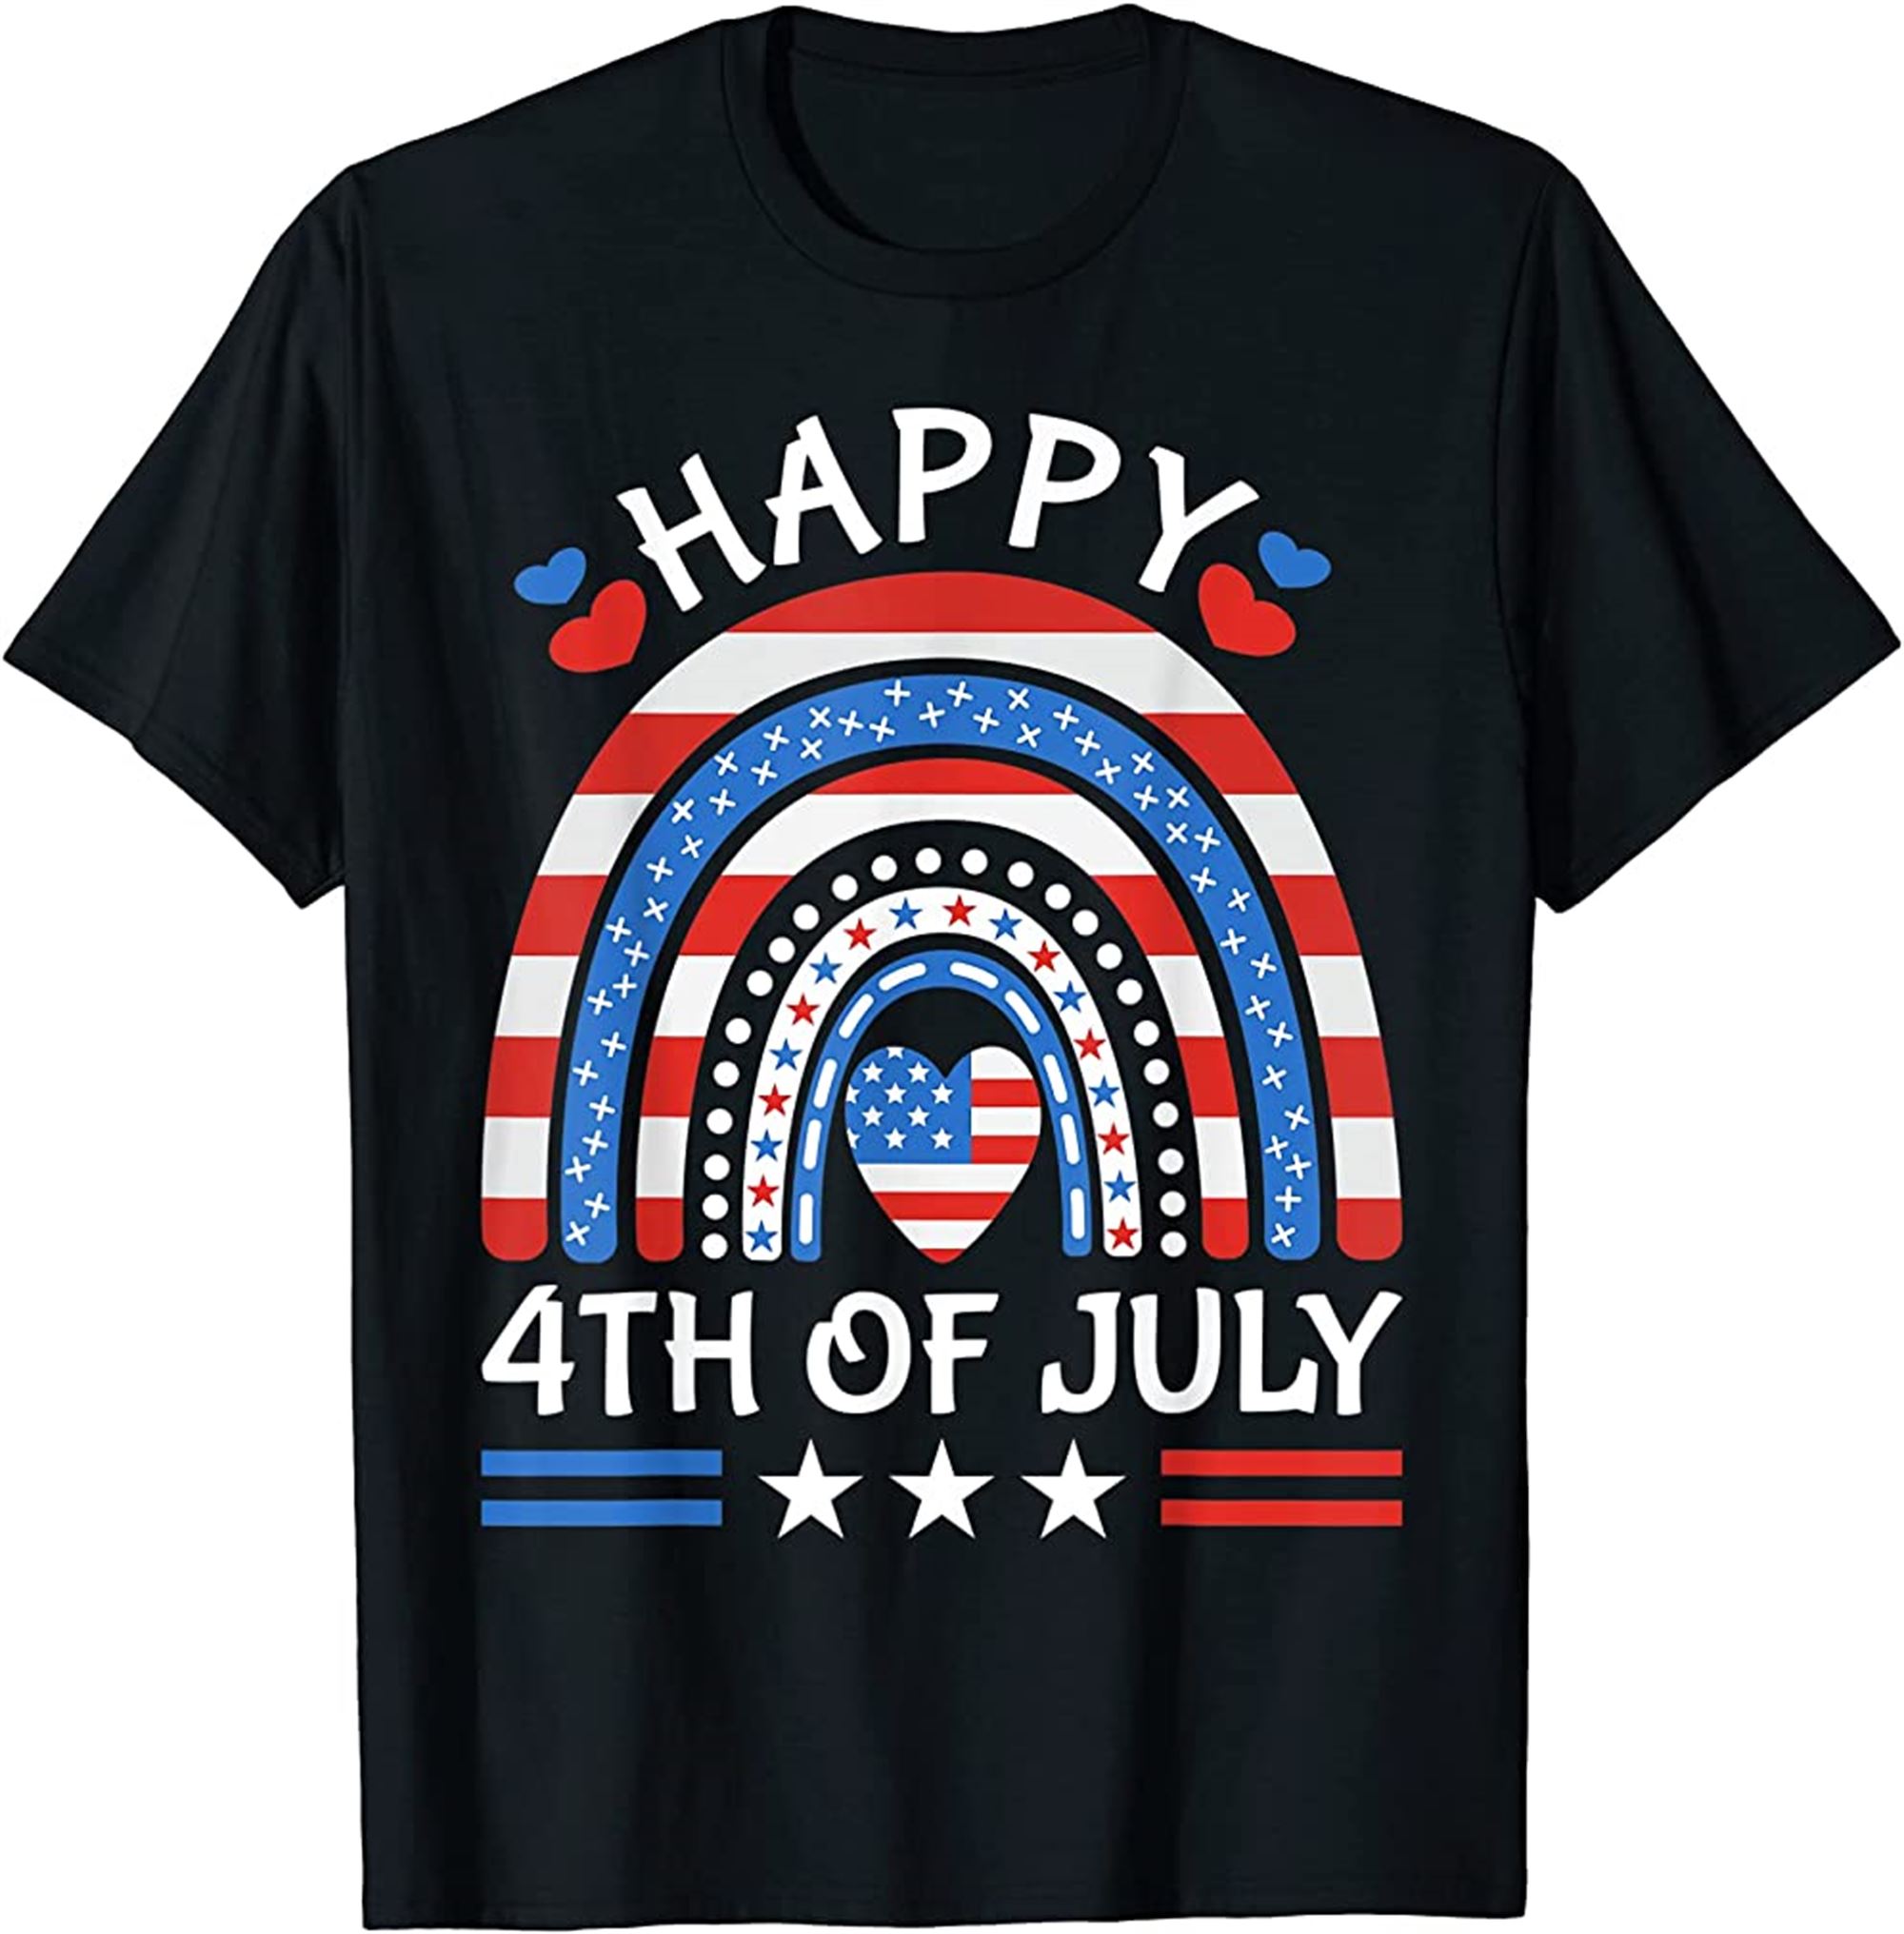 Patriotic American Flag Men Women Happy Fourth 4th Of July T-shirt Full Size Up To 5xl